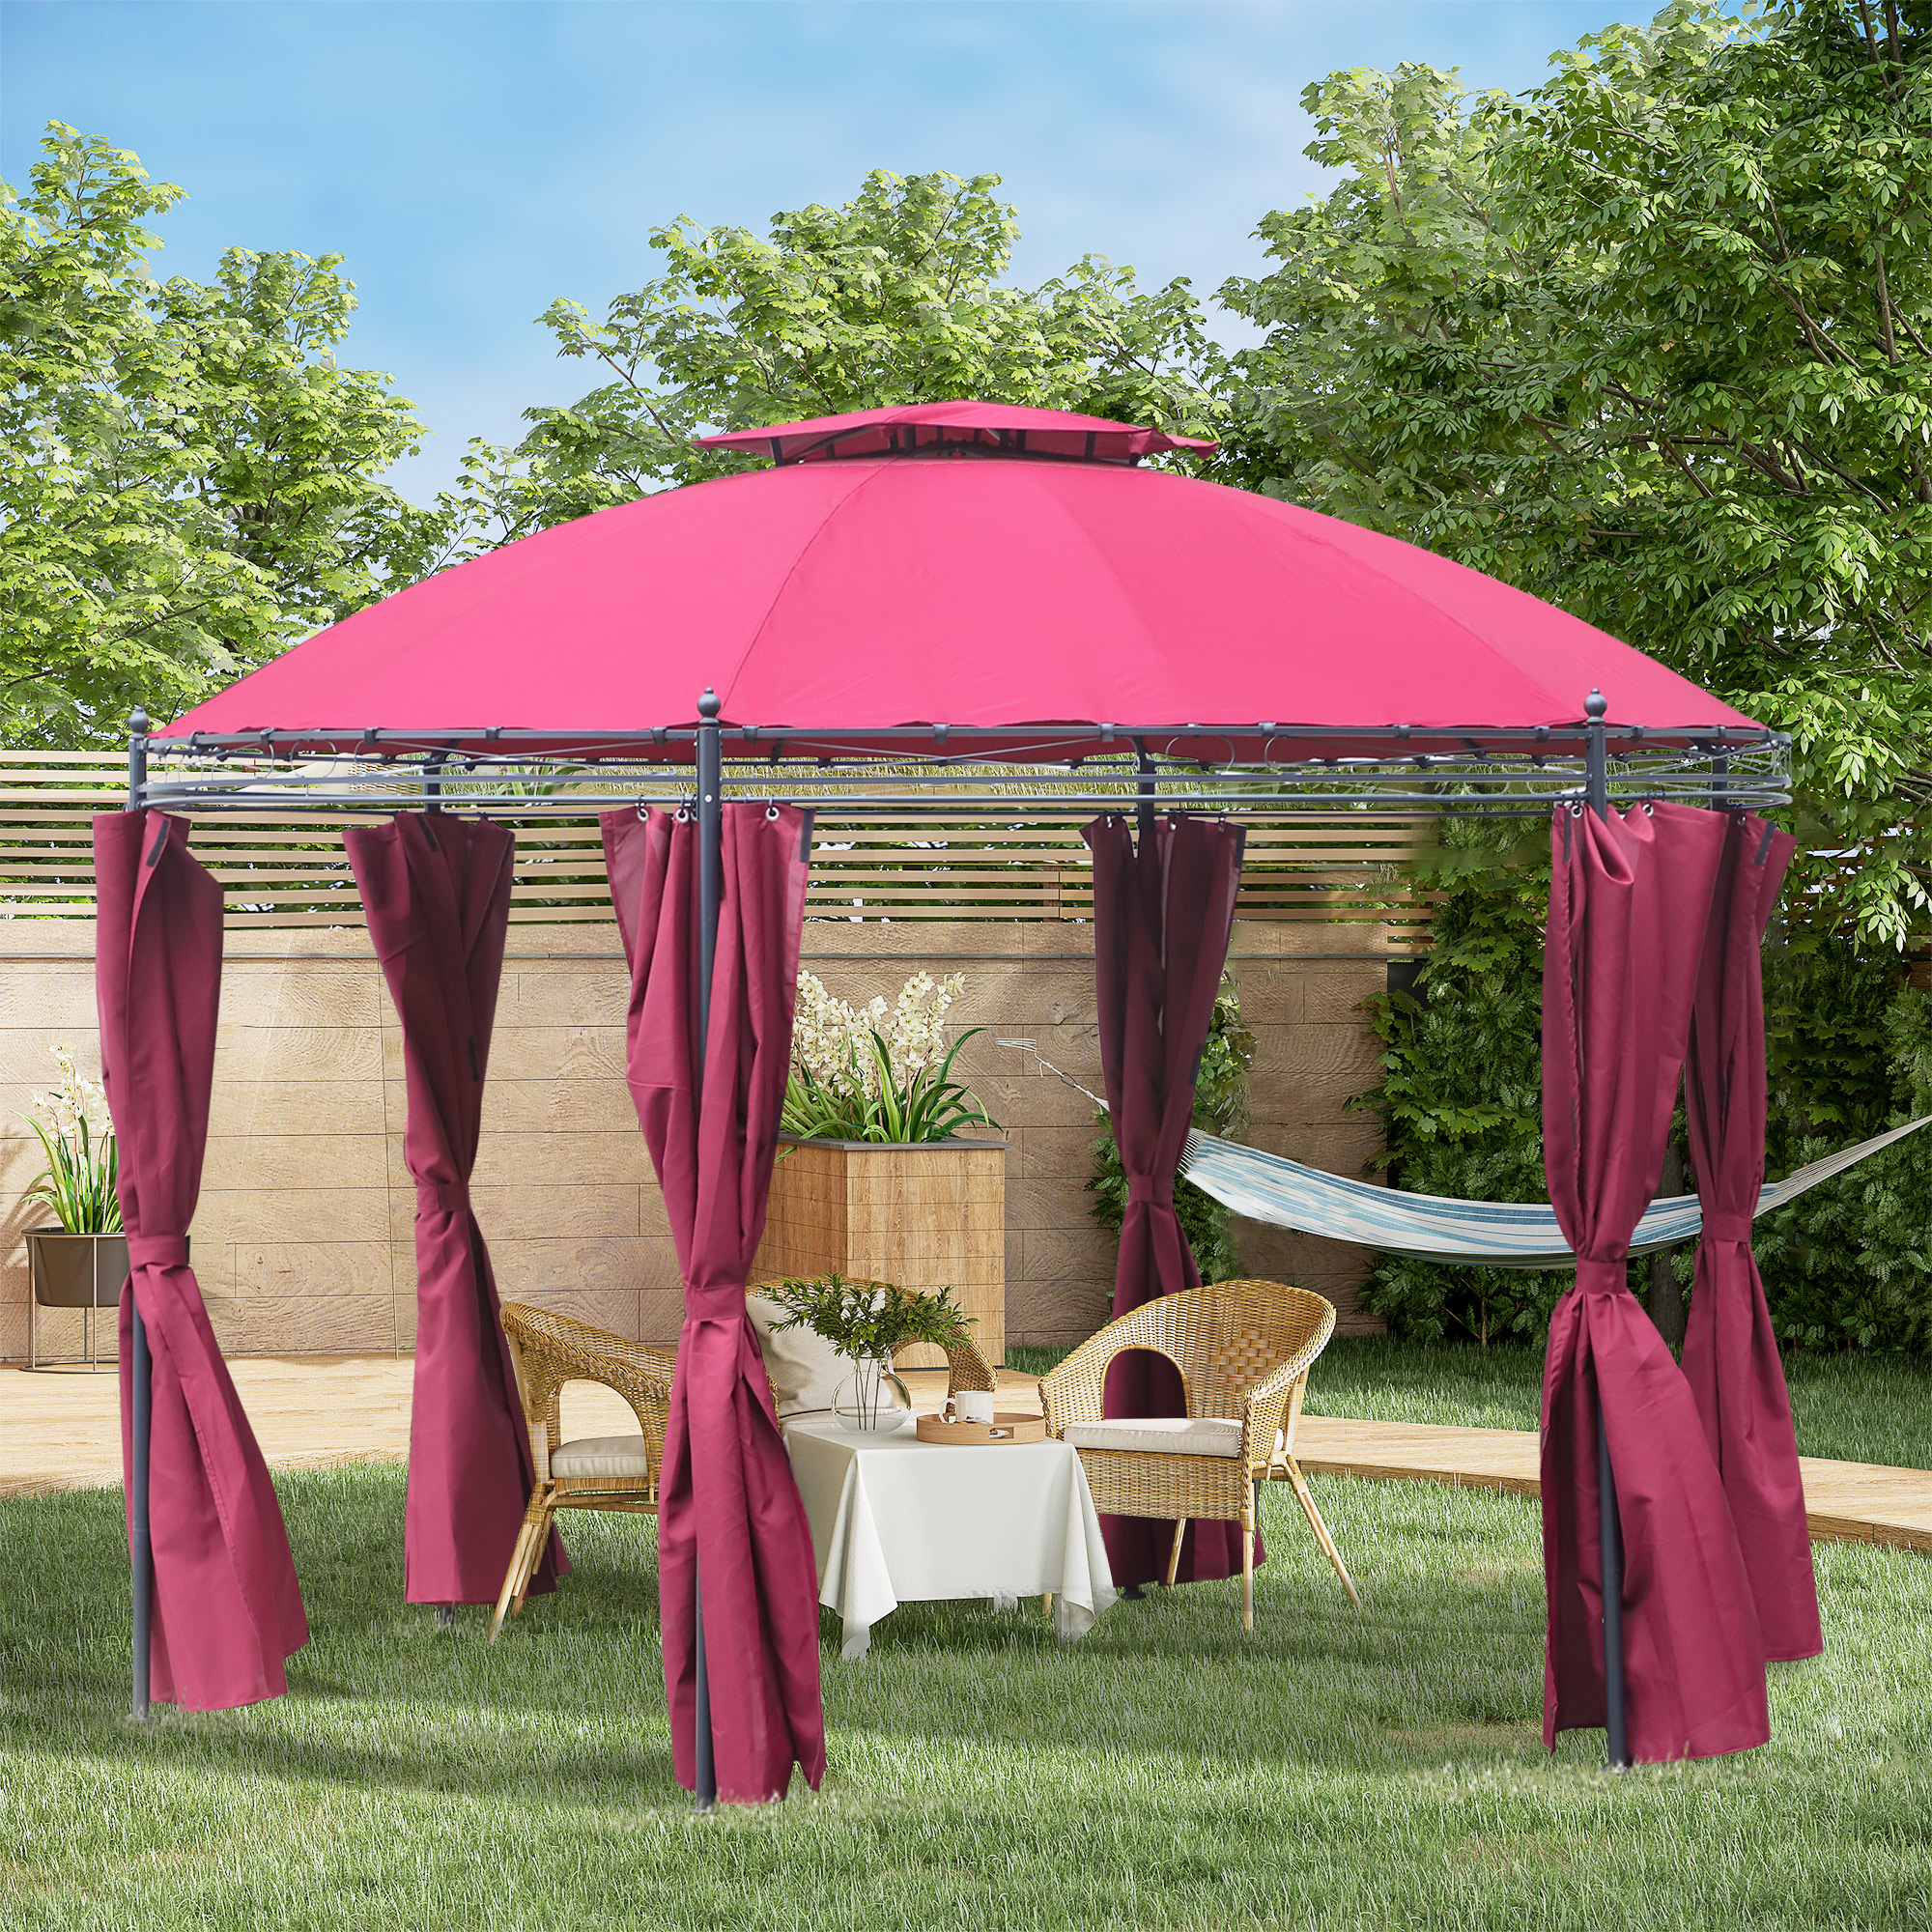 OutsunnyÂ 11.5' Patio Gazebo, Outdoor Gazebo Canopy Shelter with Curtains, Romantic Round Double Roof, Solid Steel Frame for Garden, Lawn, Backyard and Deck, Wine Red - image 2 of 9